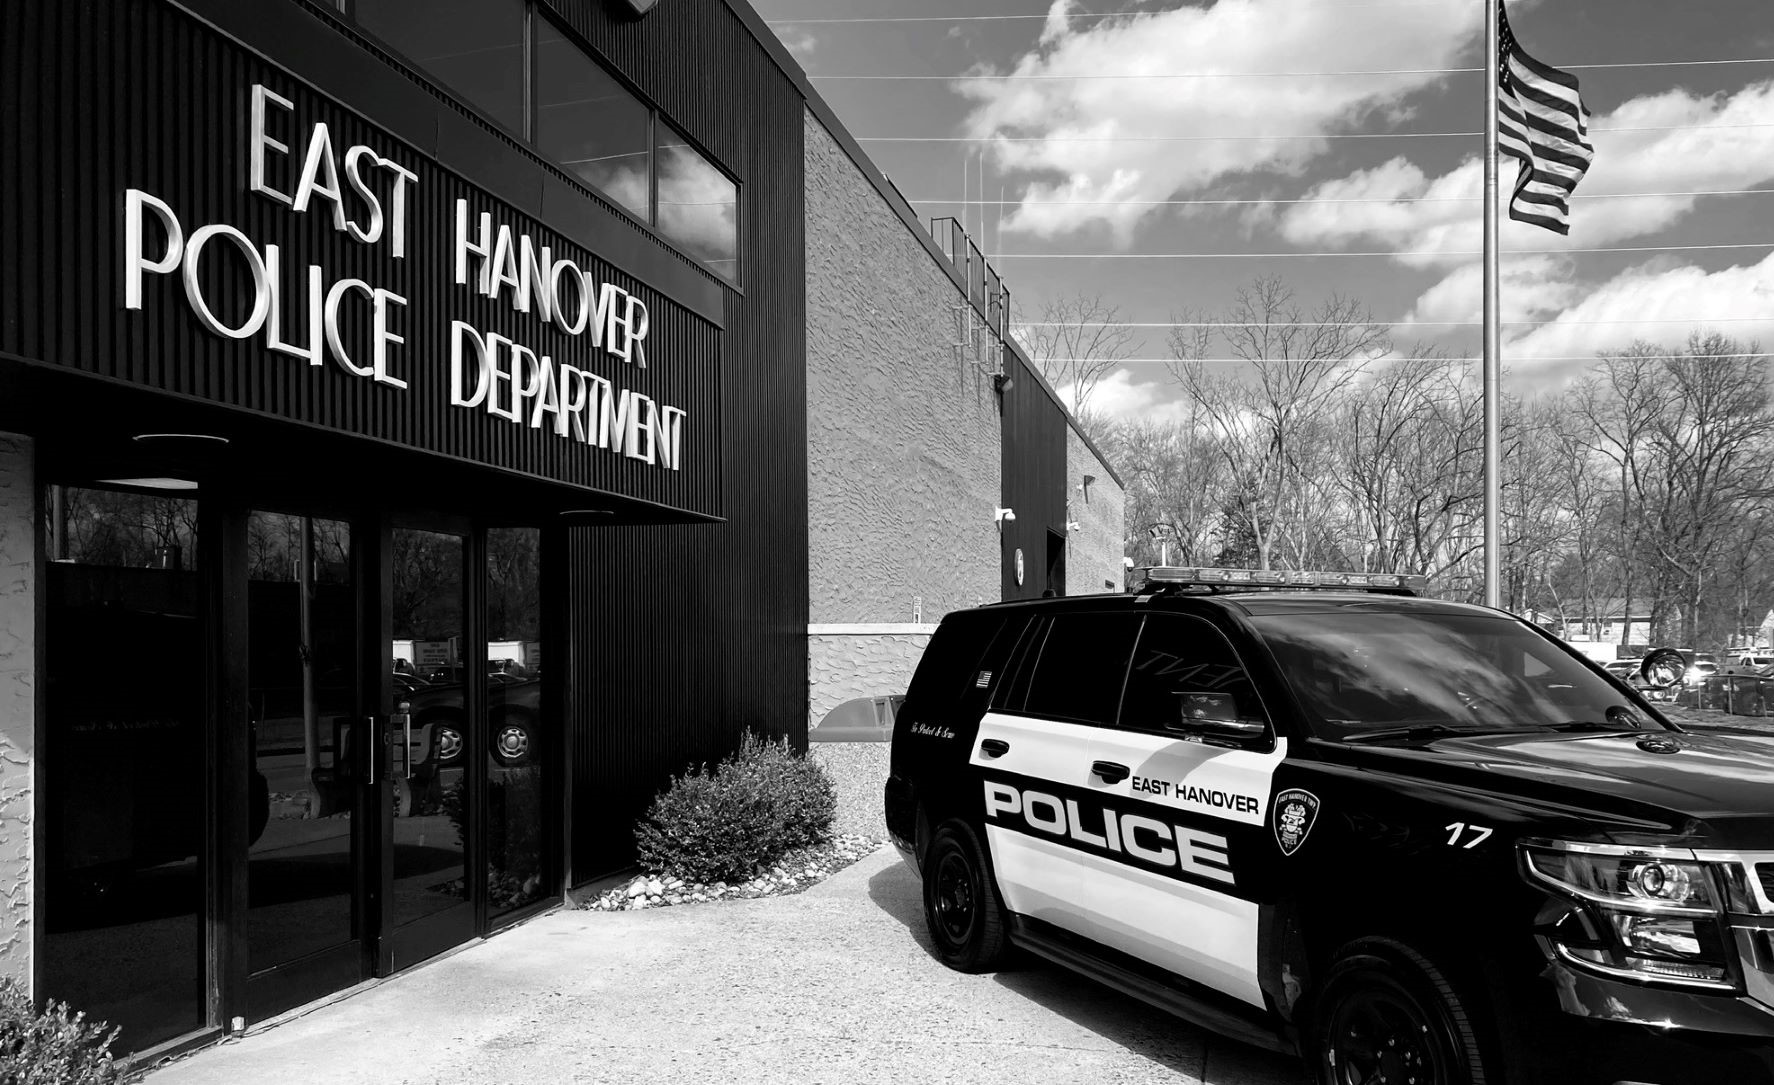 East Hanover Township Police Department, NJ 